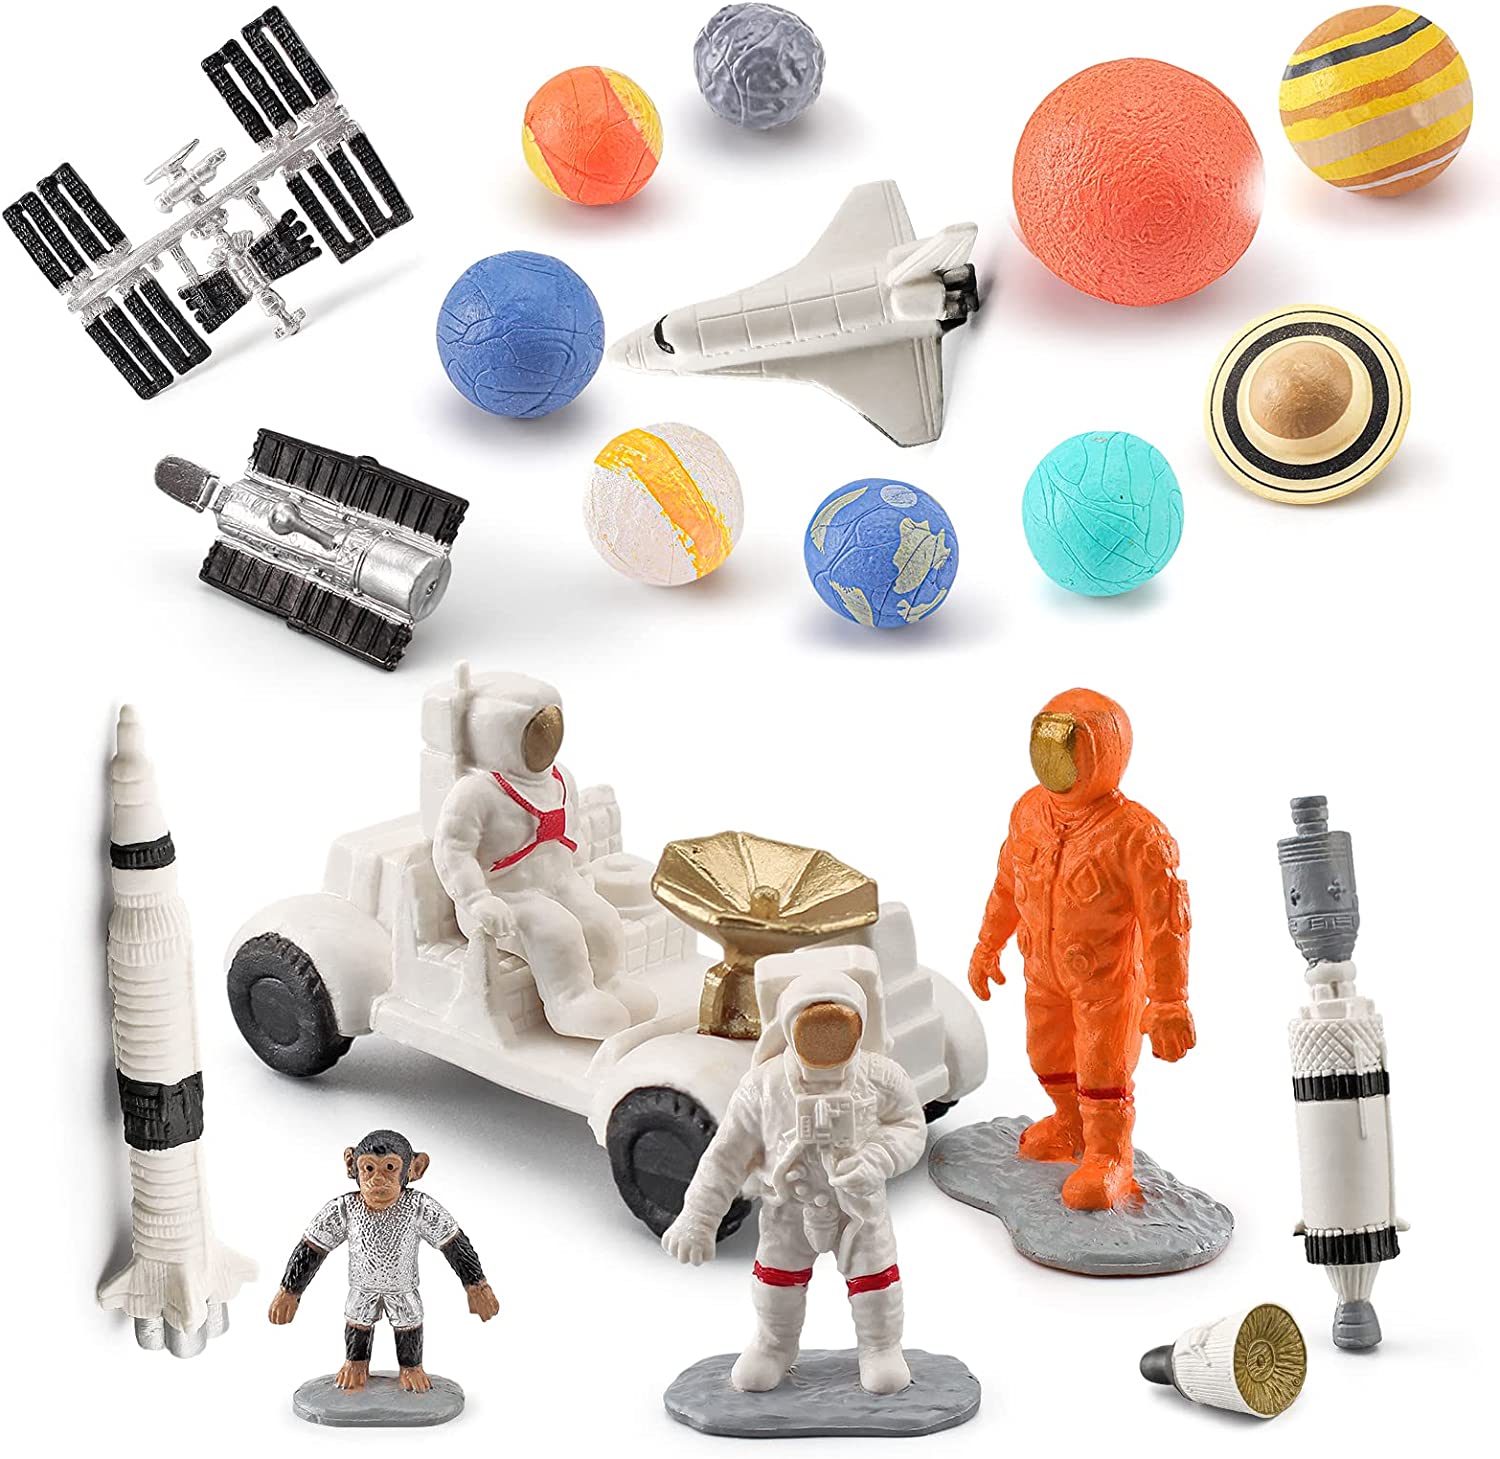 19PCS Planets Solar System Astronaut Figure Toy Children Solar Power Kit Space Exploration Spaceman Science Kit School Diorama Project for Kids Party Birthday Gift